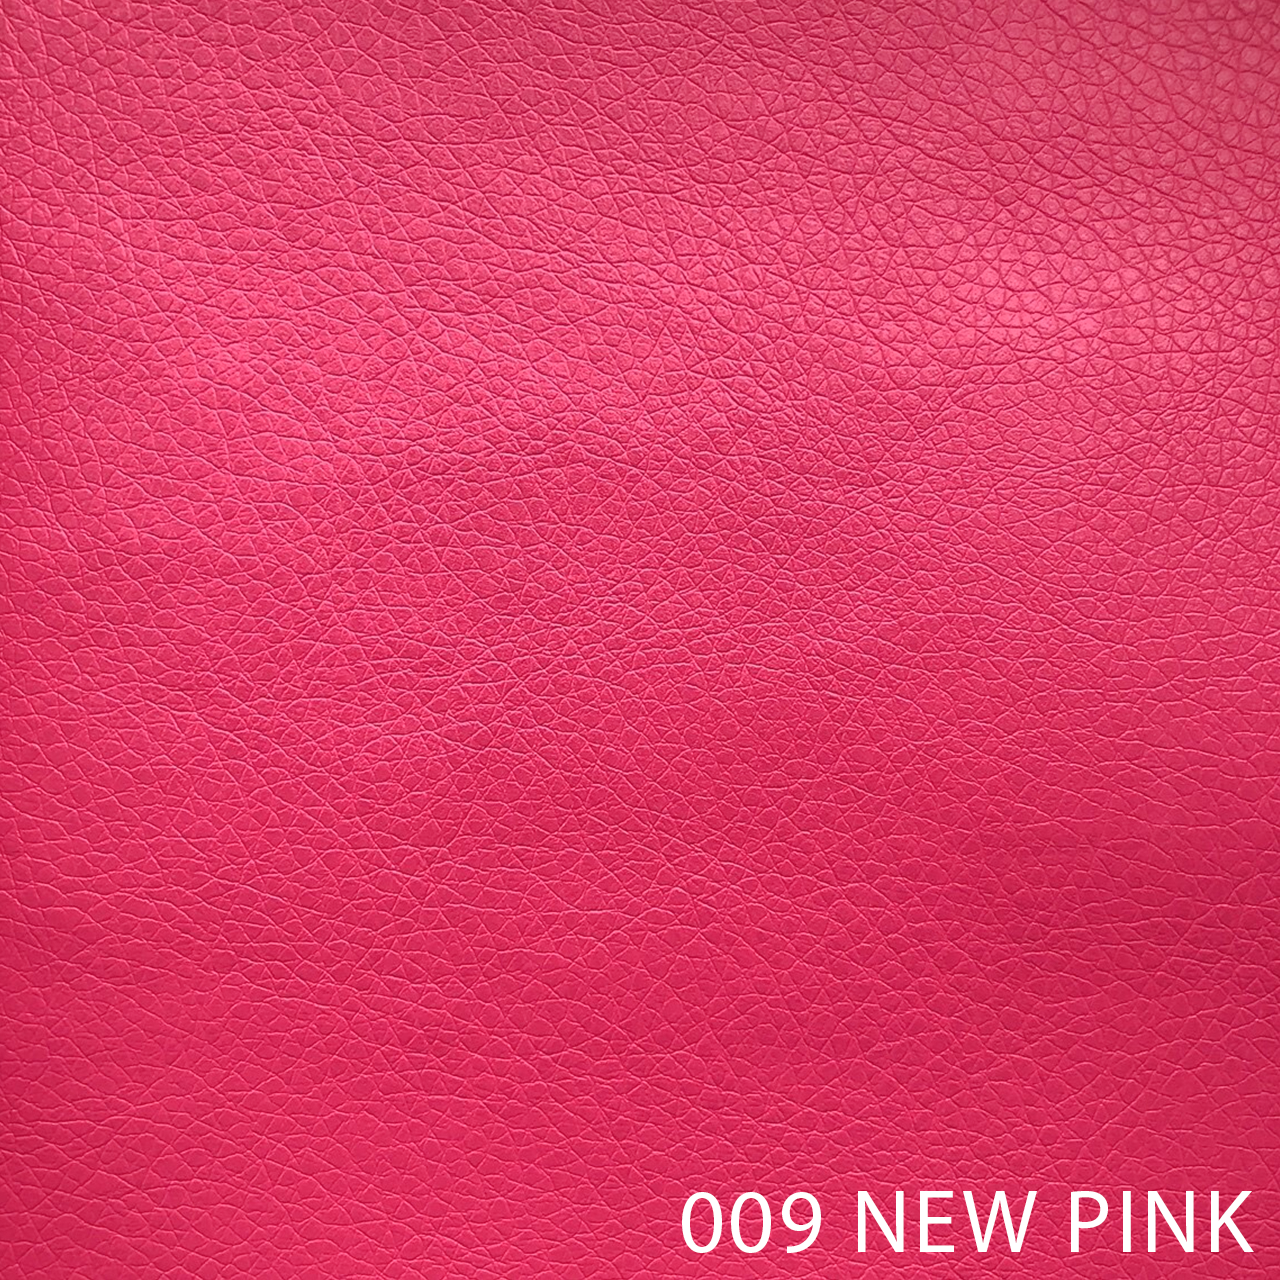 009 NEW PINK